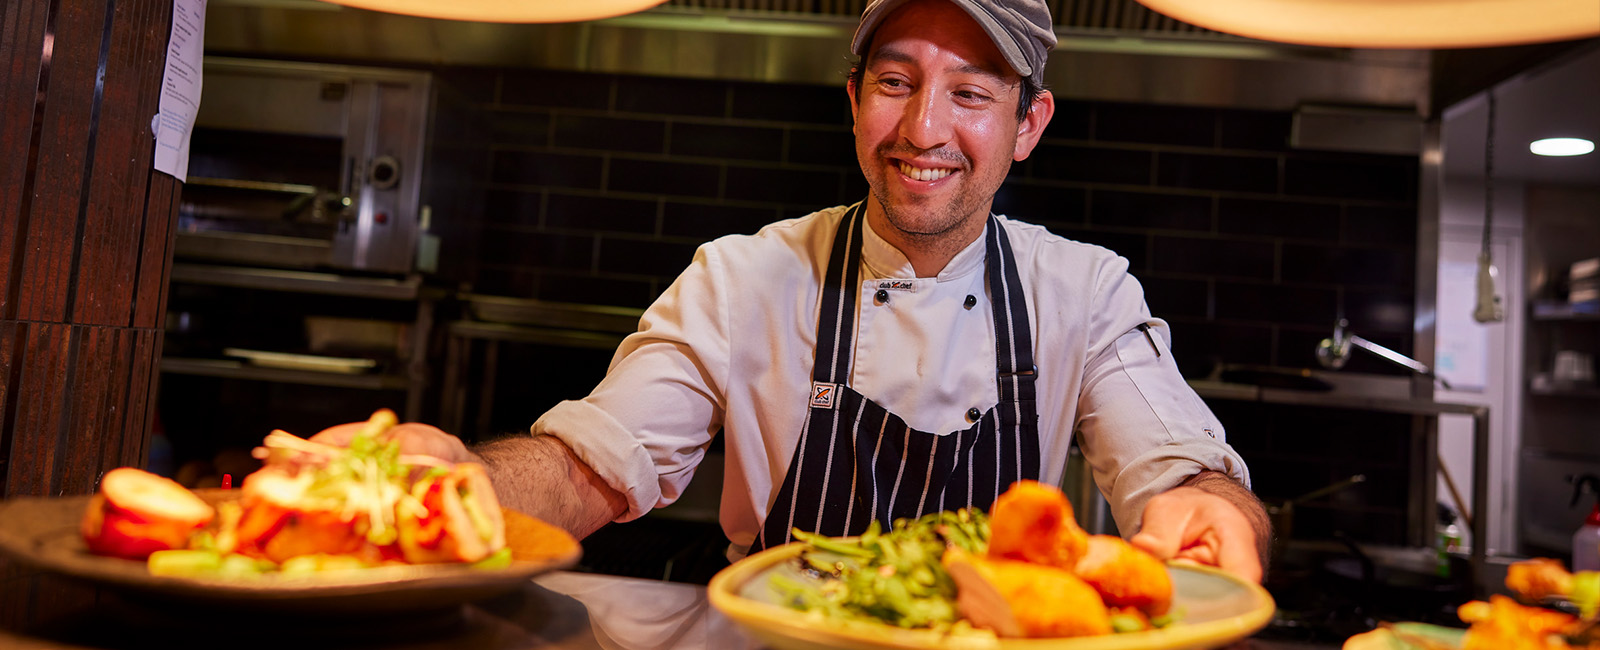 A smiling chef serving two plates of food